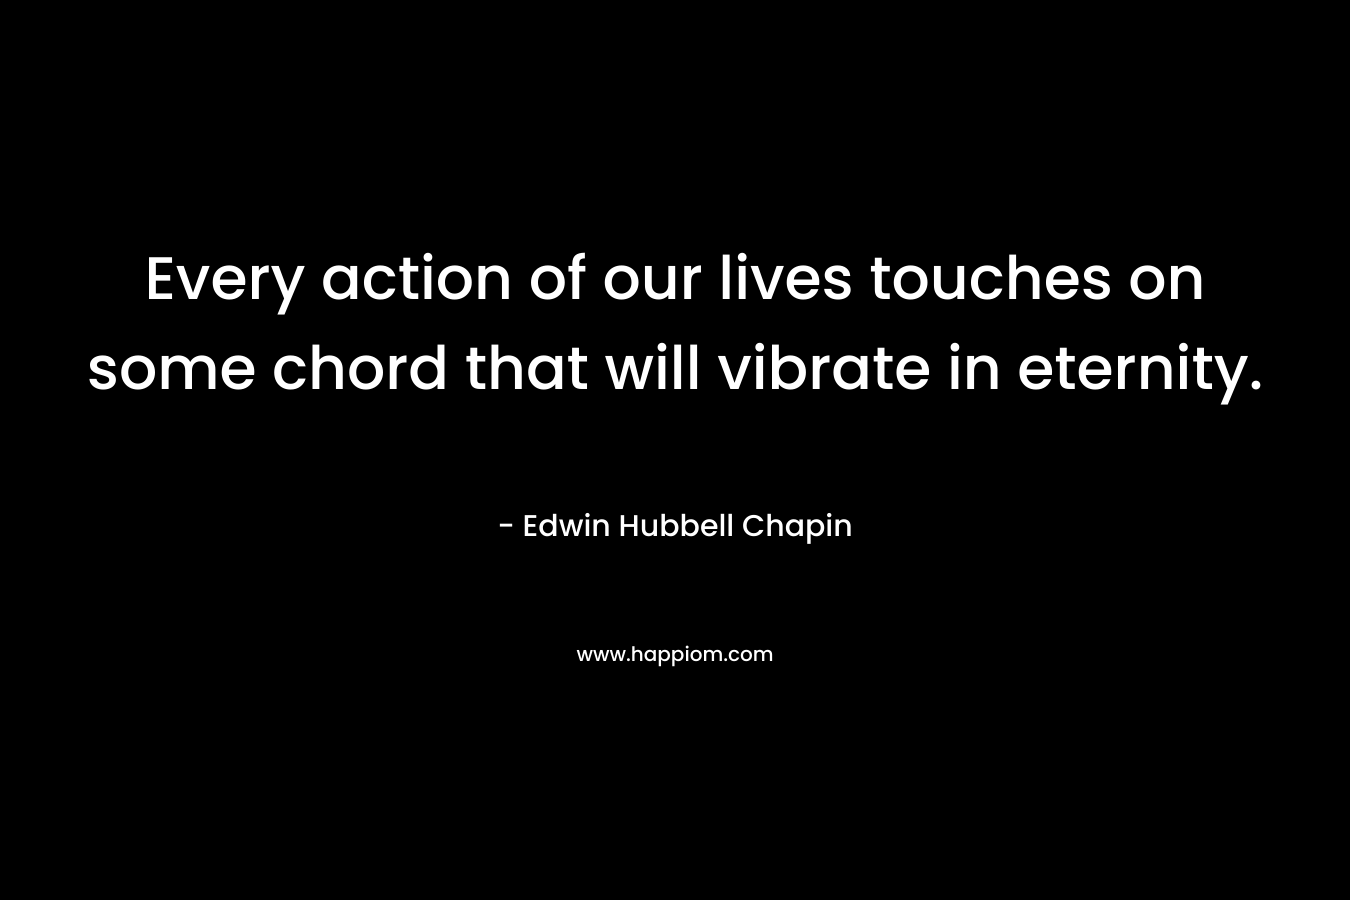 Every action of our lives touches on some chord that will vibrate in eternity.